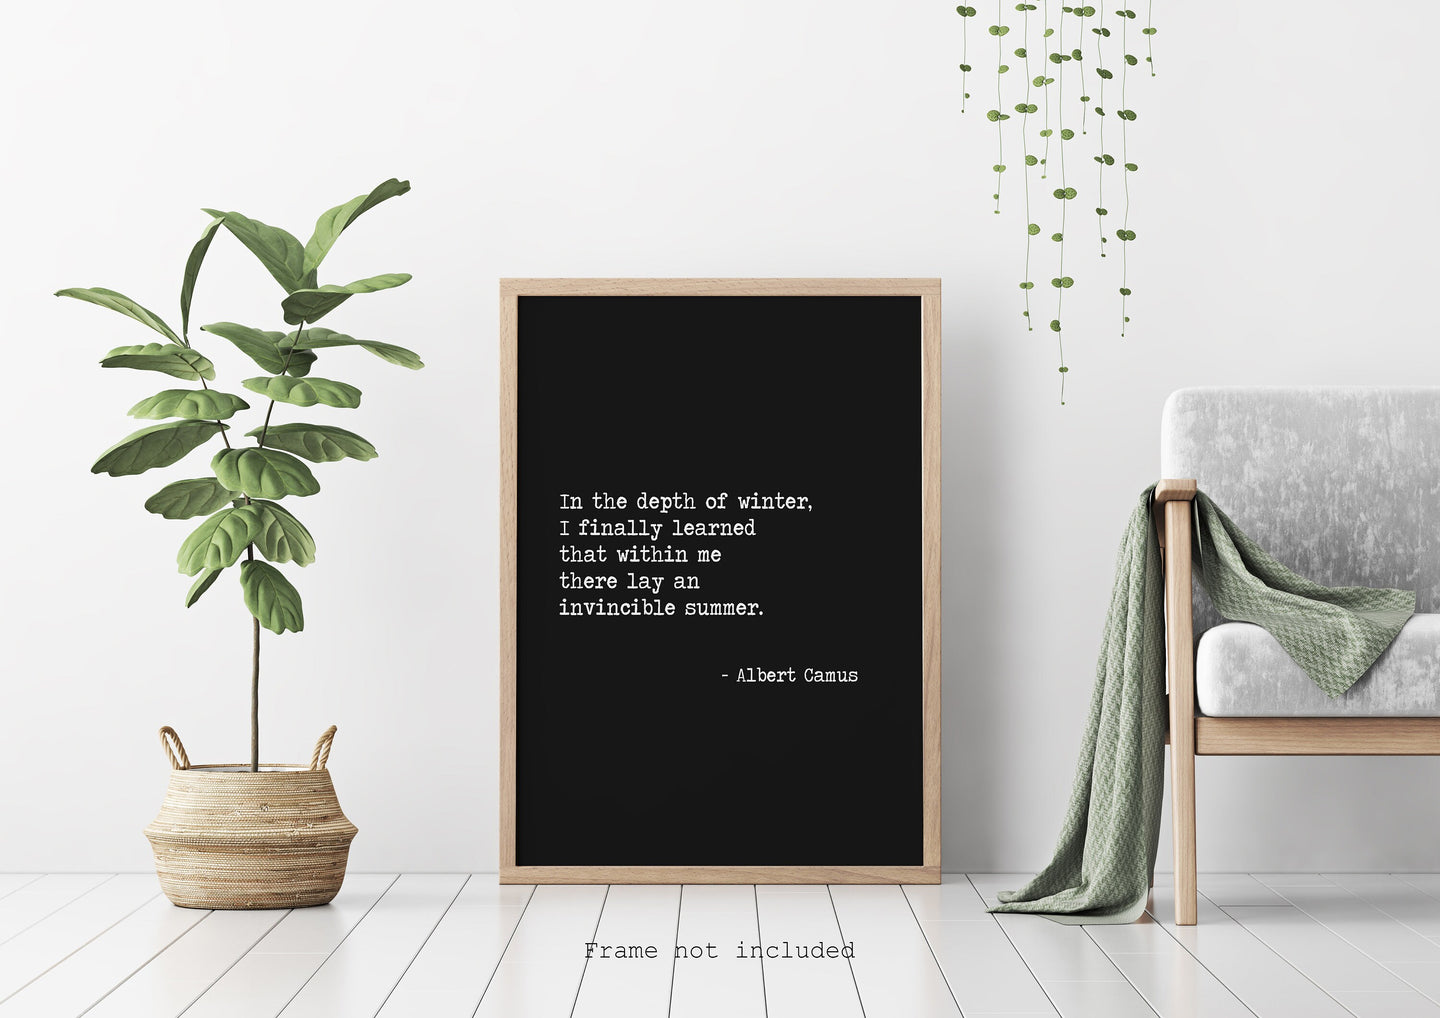 Albert Camus Quote - In the depth of winter, I finally learned that within me there lay an invincible summer book quote Typography print